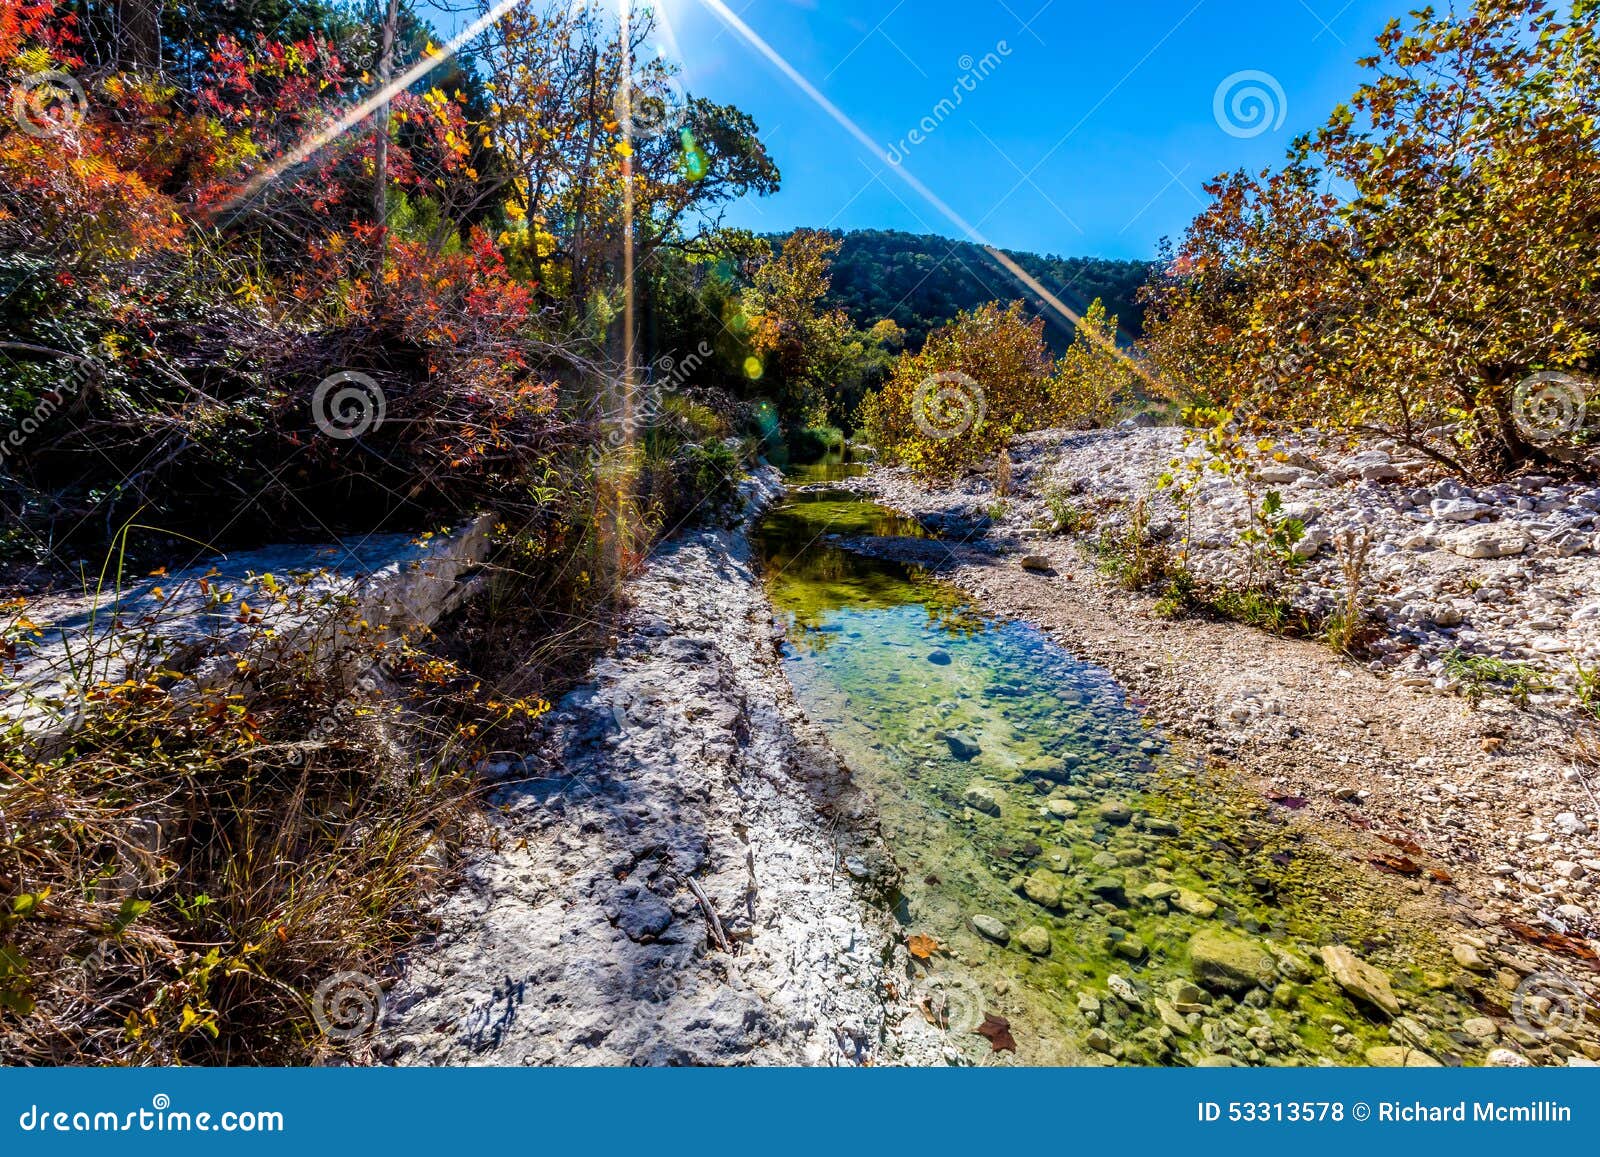 wide shot of a rocky stream surrounded by fall foliage with blue skies at lost maples